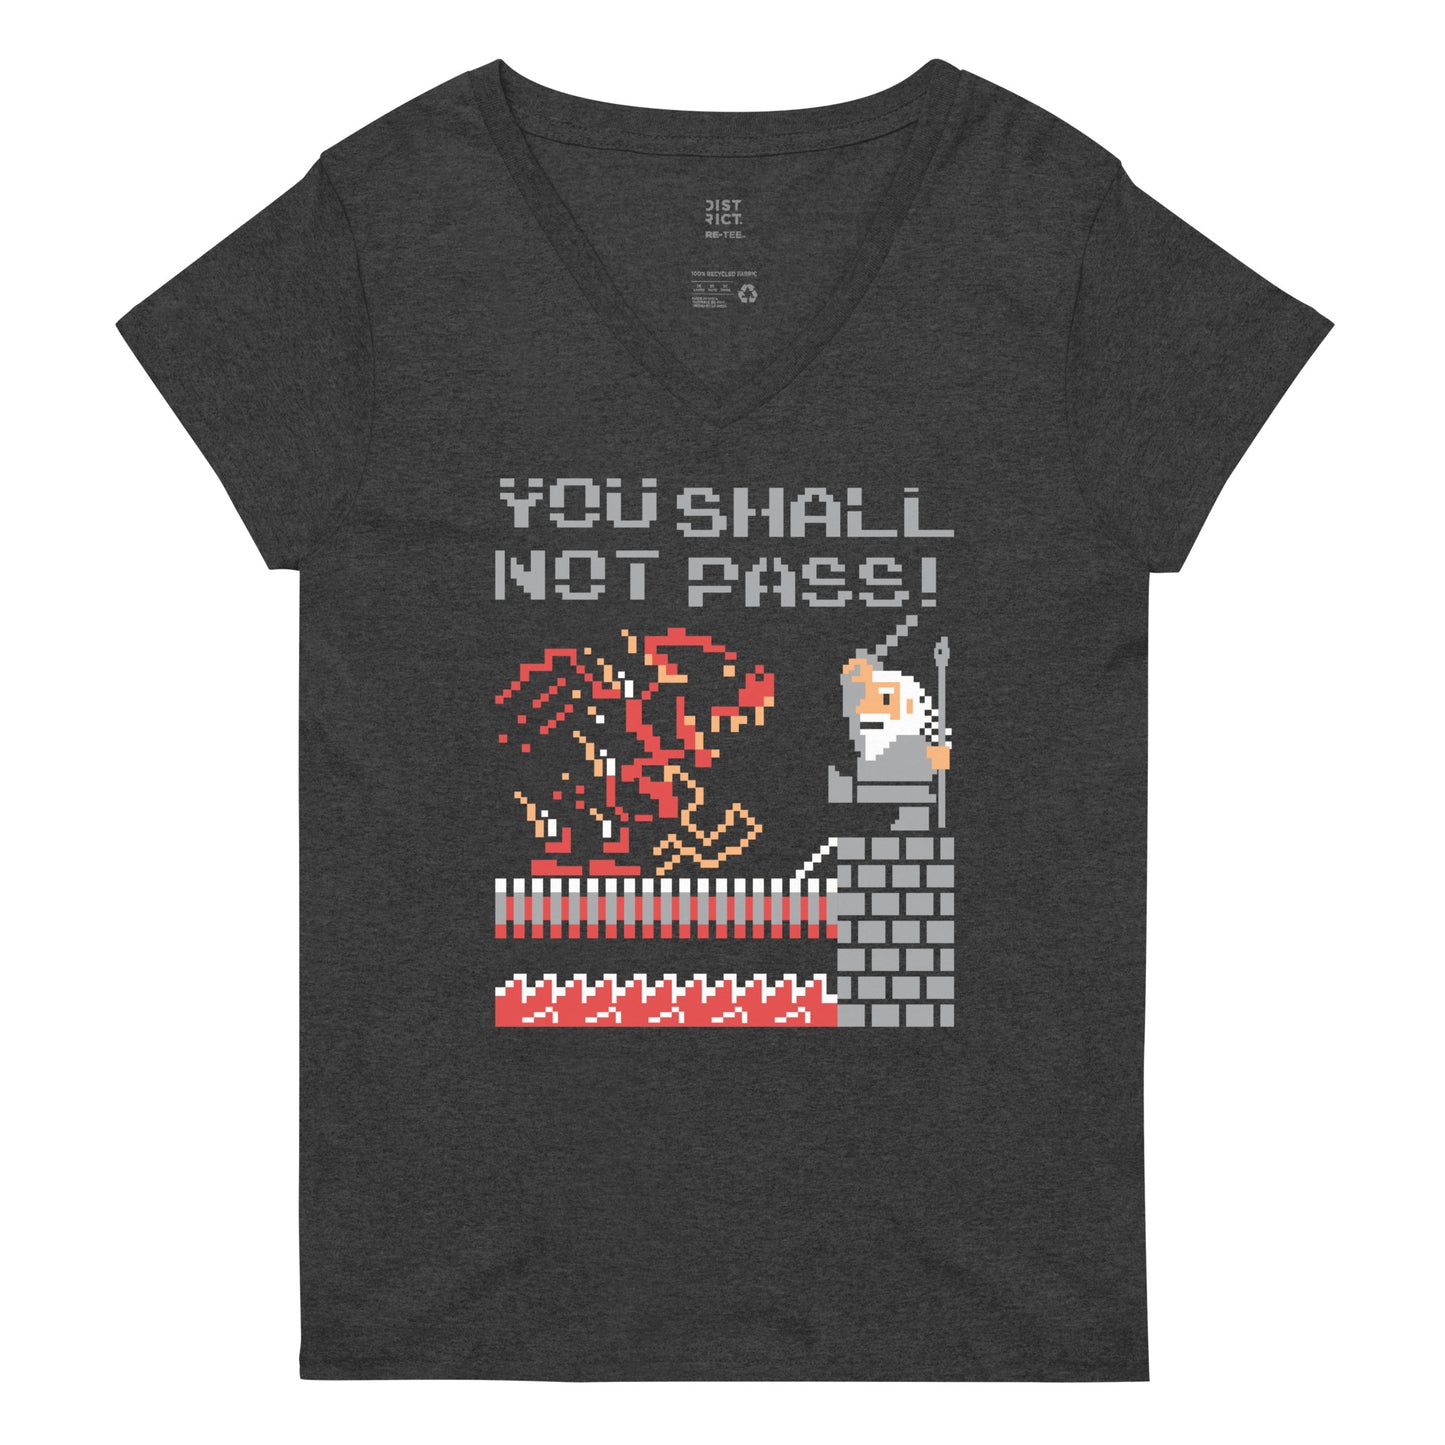 You Shall Not Pass! Women's V-Neck Tee